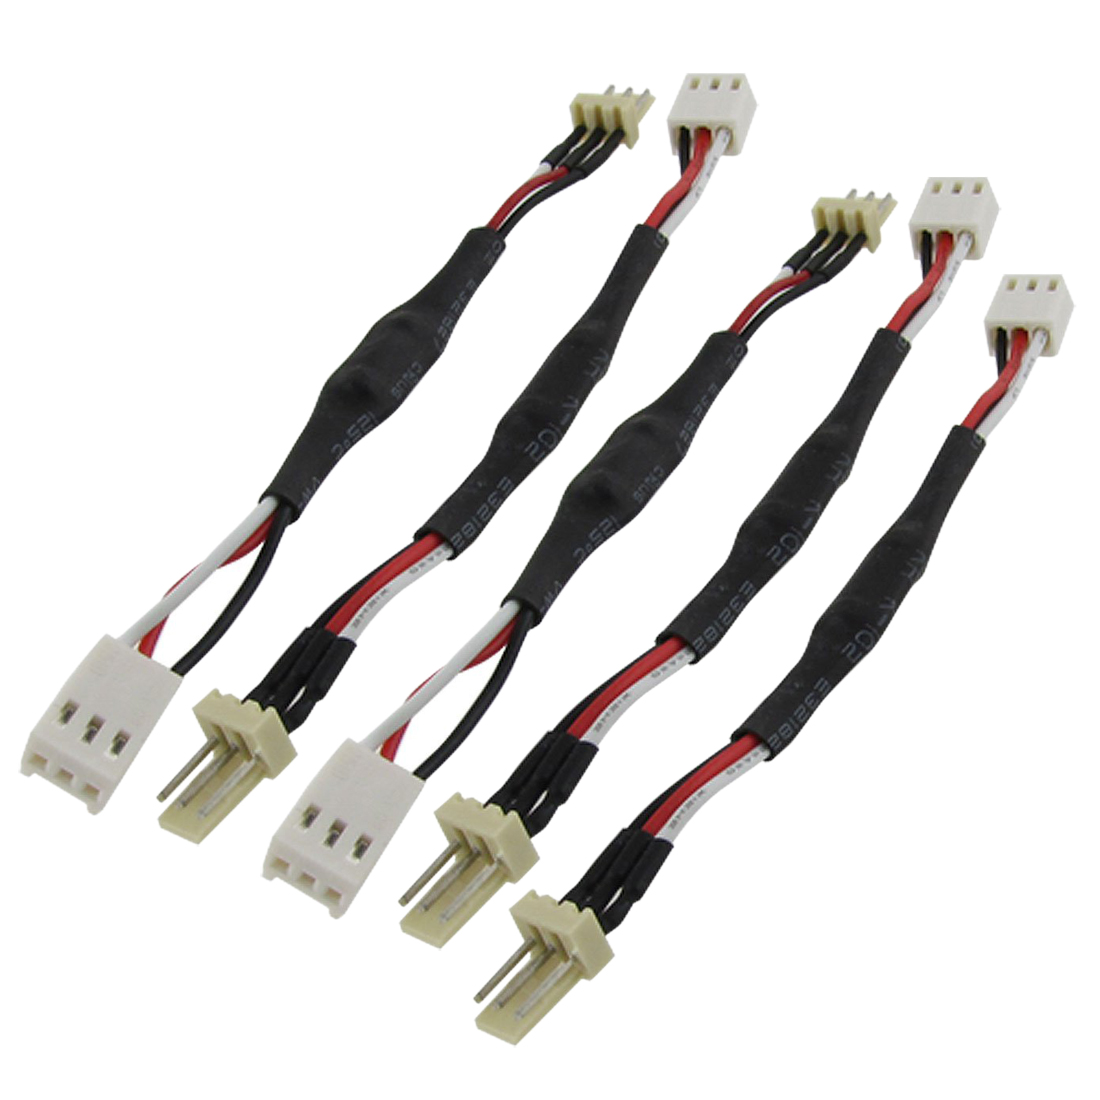 GTFS Hot 5 Pcs 3 Pins Noise Reduction Cable Lead for PC Cooling Fan